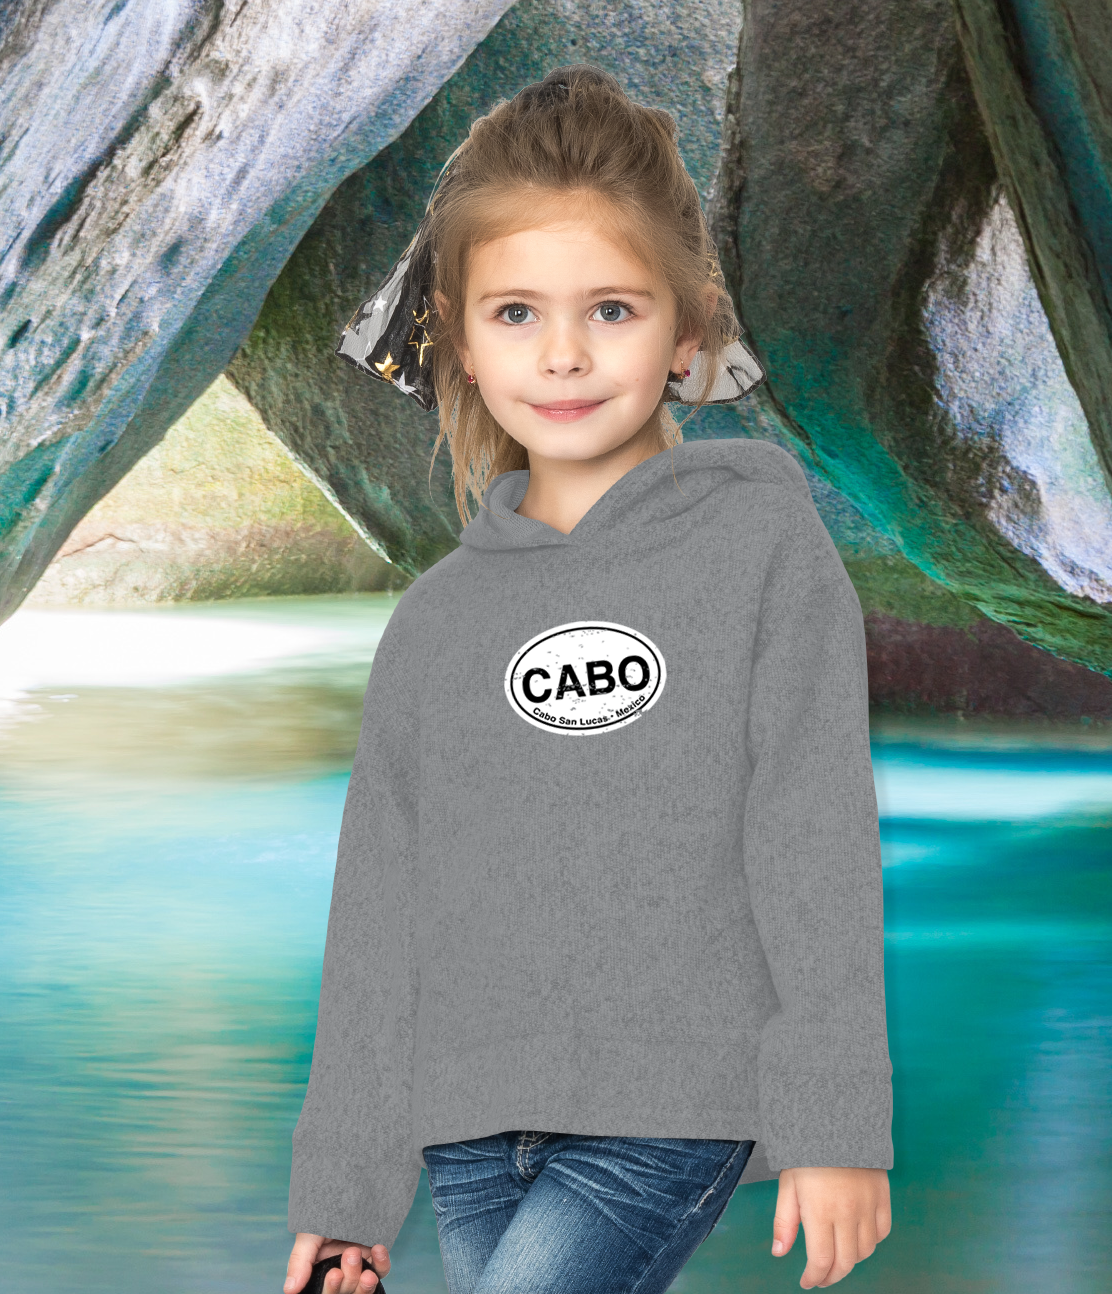 Cabo Classic Youth Hoodie - My Destination Location